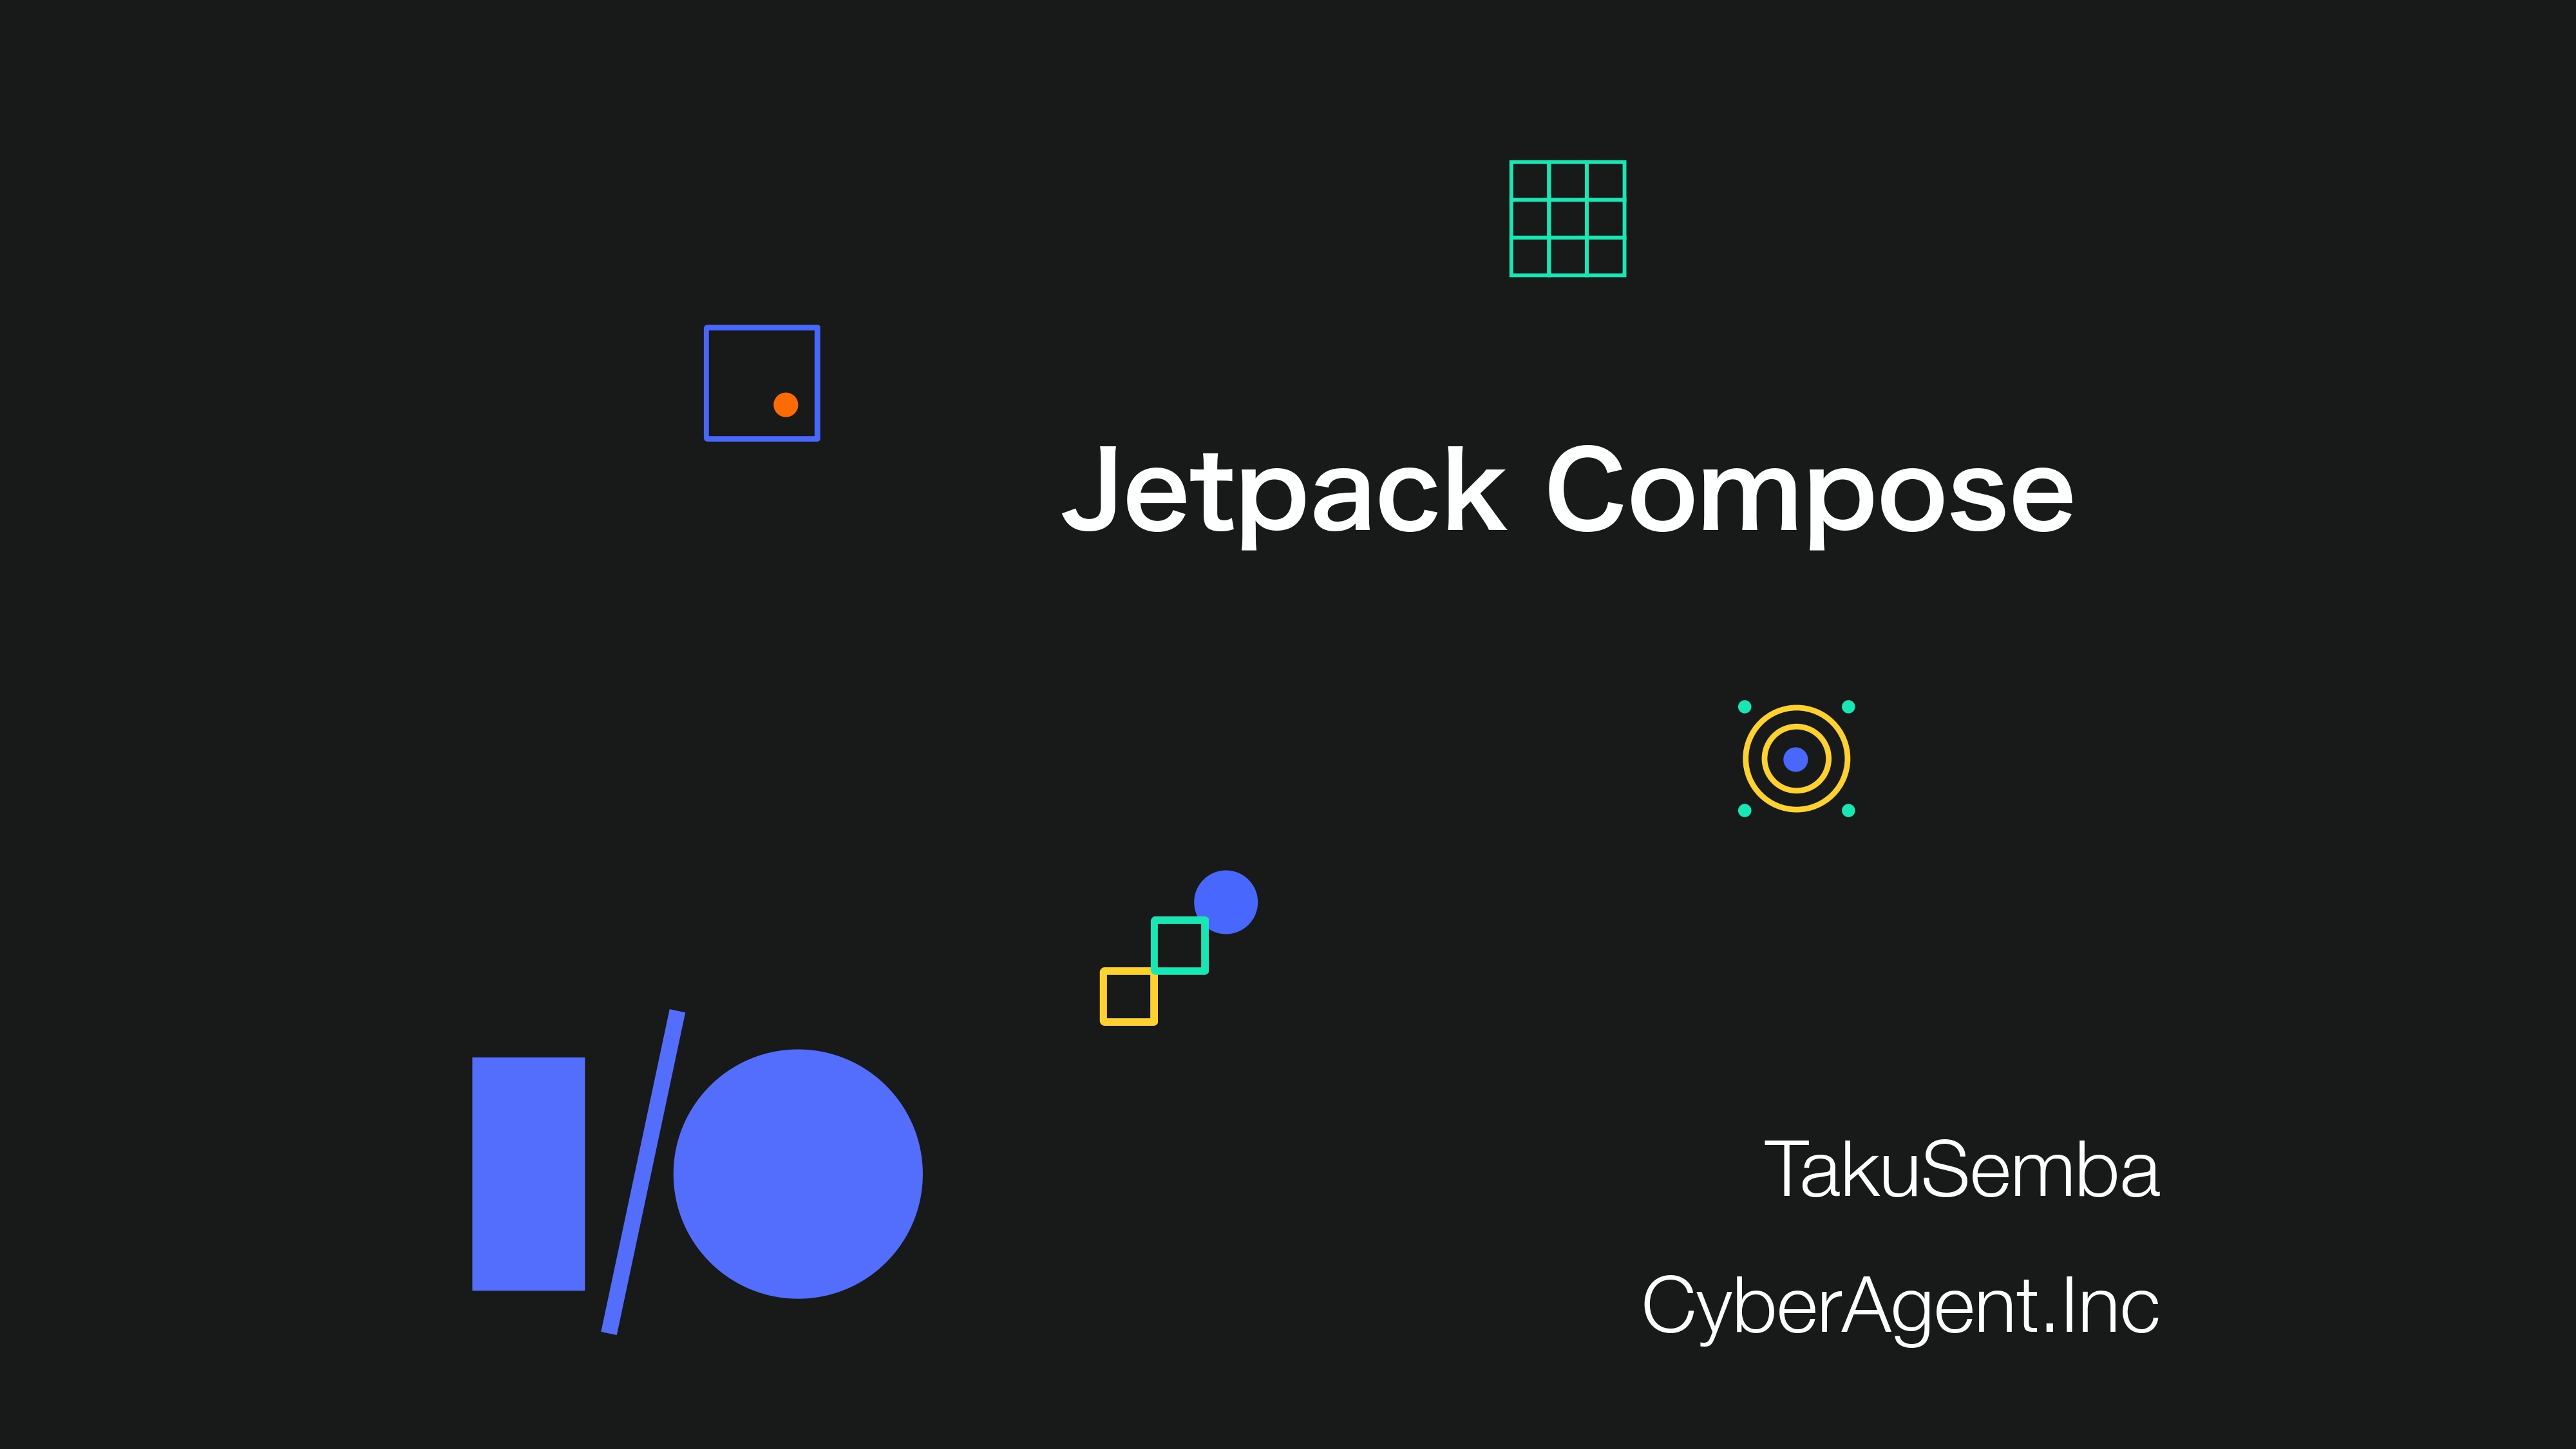 Jetpack Compose by TakuSemba